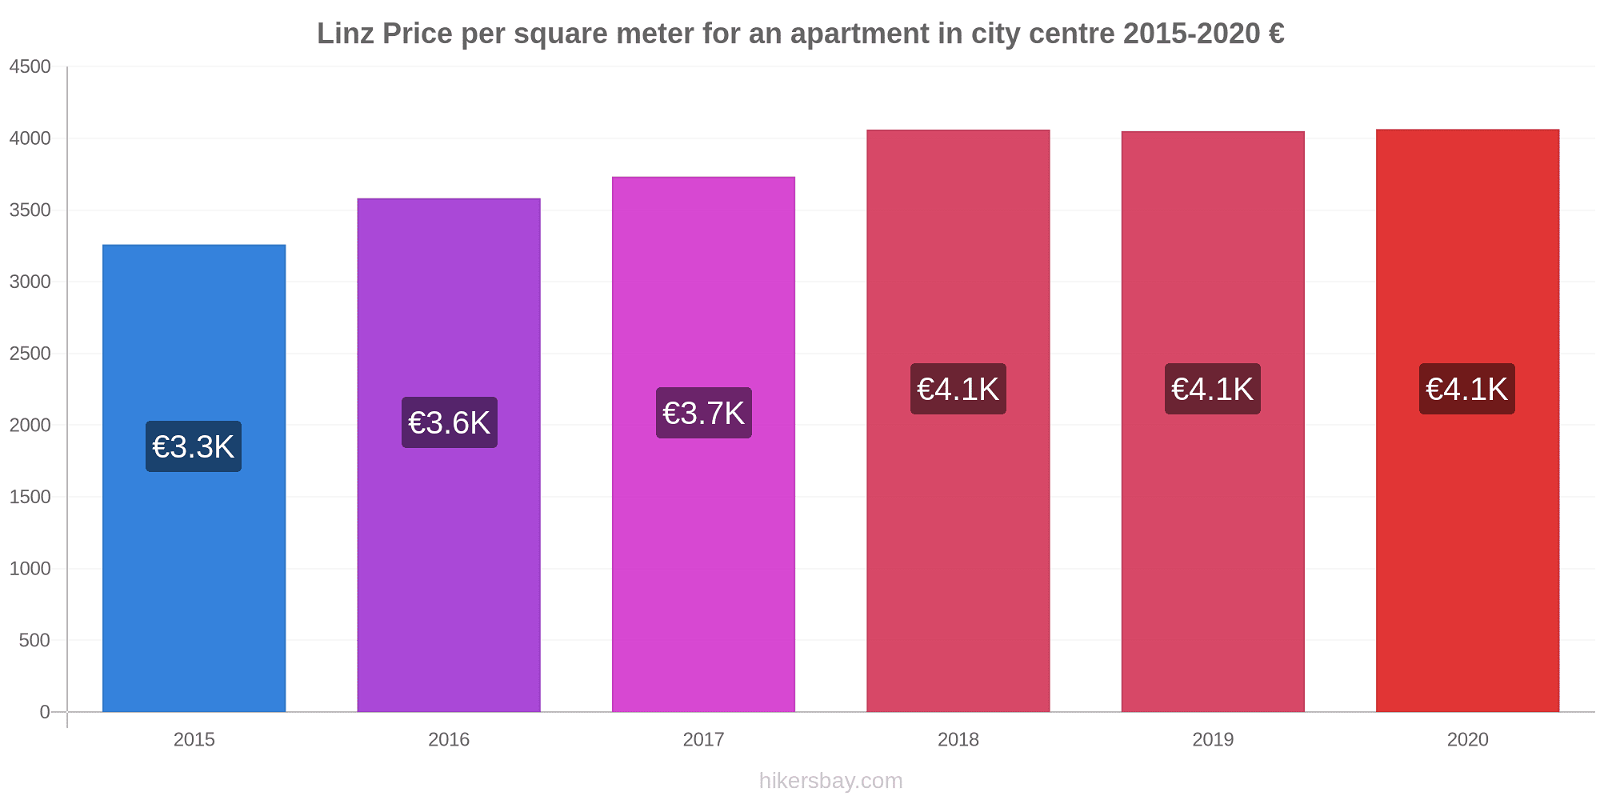 Linz price changes Price per square meter for an apartment in city centre hikersbay.com